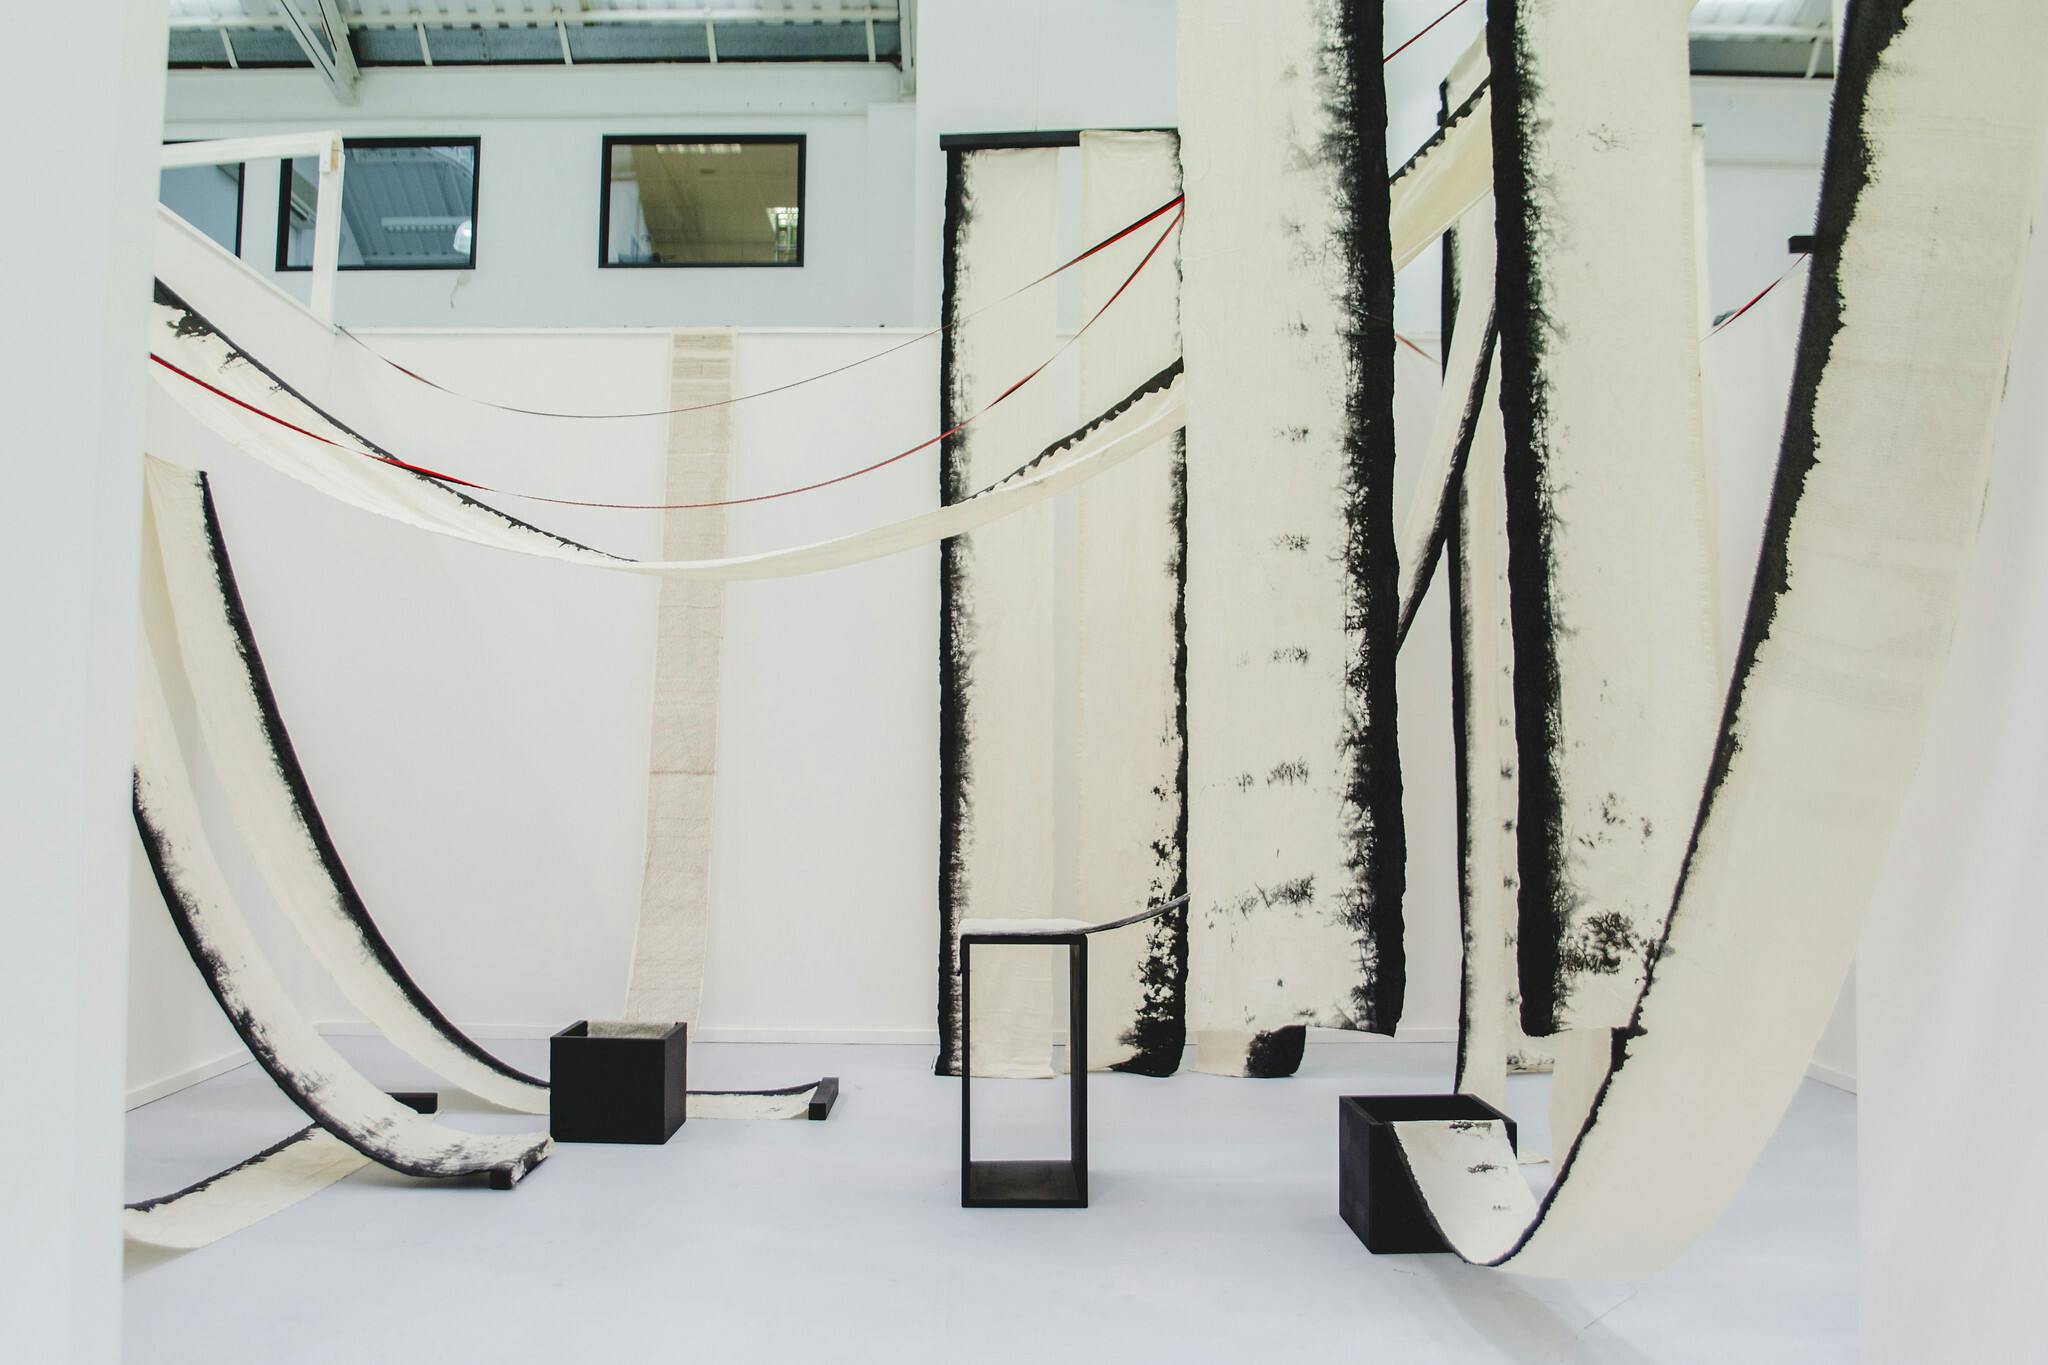 In a white exhibition space, long pieces of off-white fabric hang from the ceiling with the ends tucked into black boxes. The material has black edges with small text printed on it.